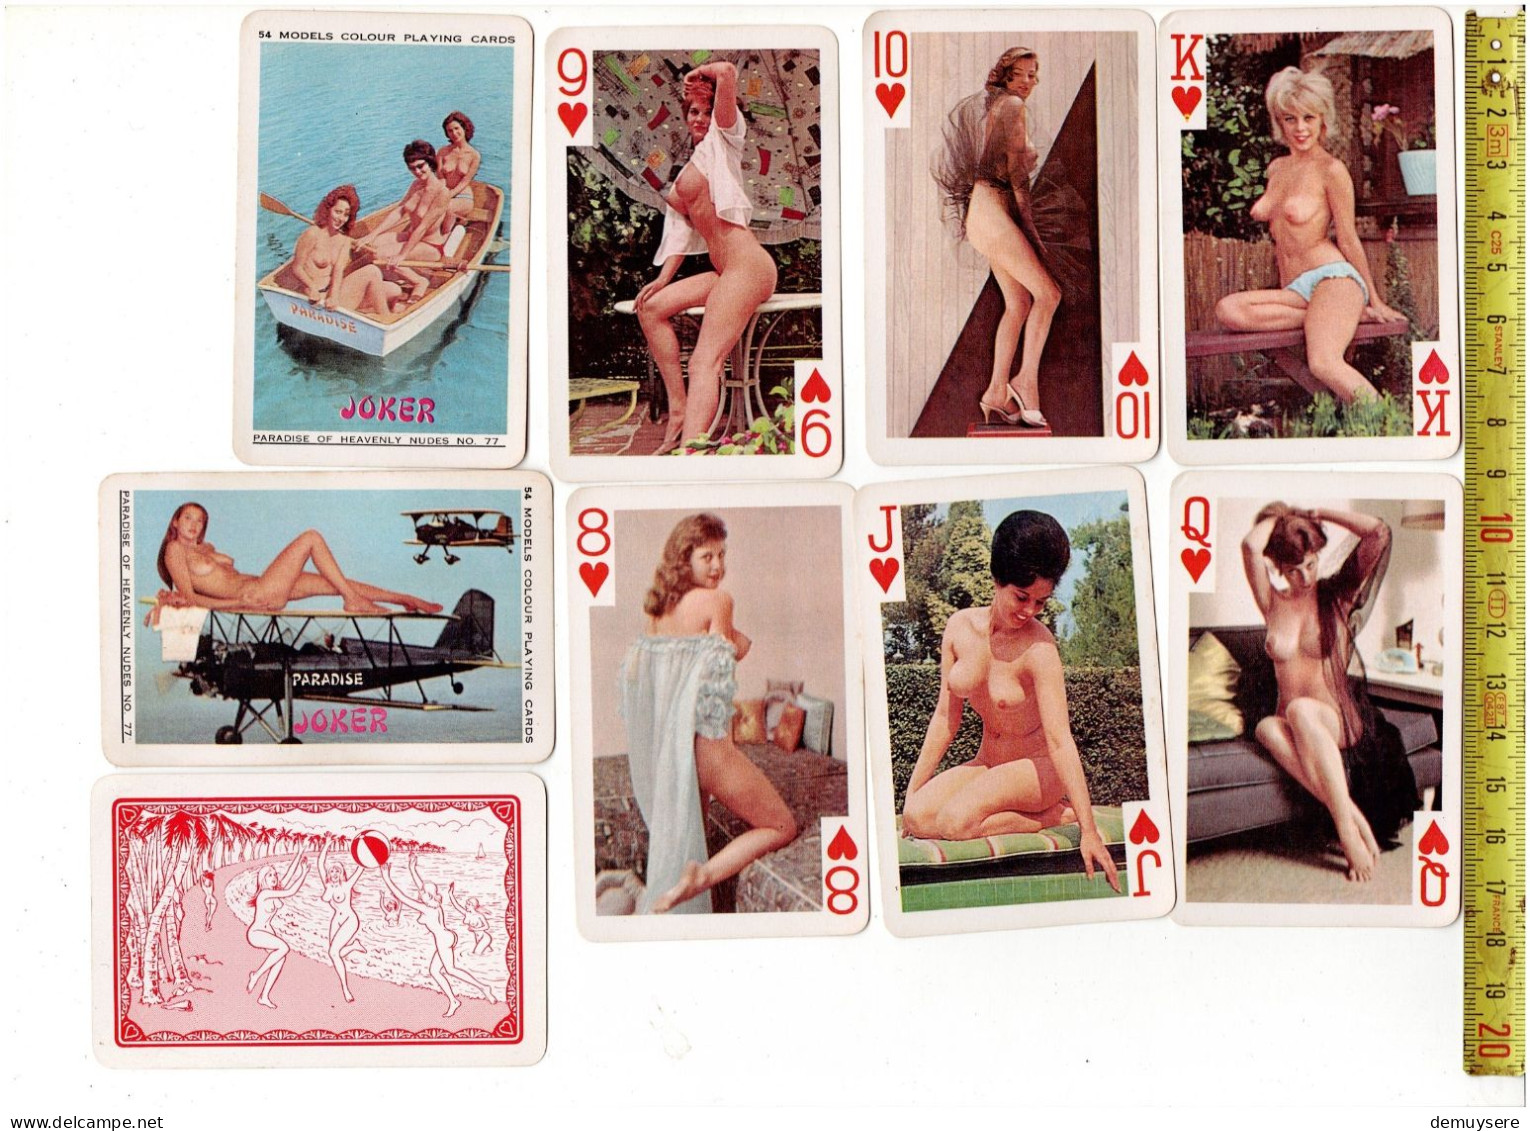 KL 3757 - MODELS COLOUR PLAYING CARDS - PARADISE OF HEAVENLY NUDES NO 77 - Playing Cards (classic)